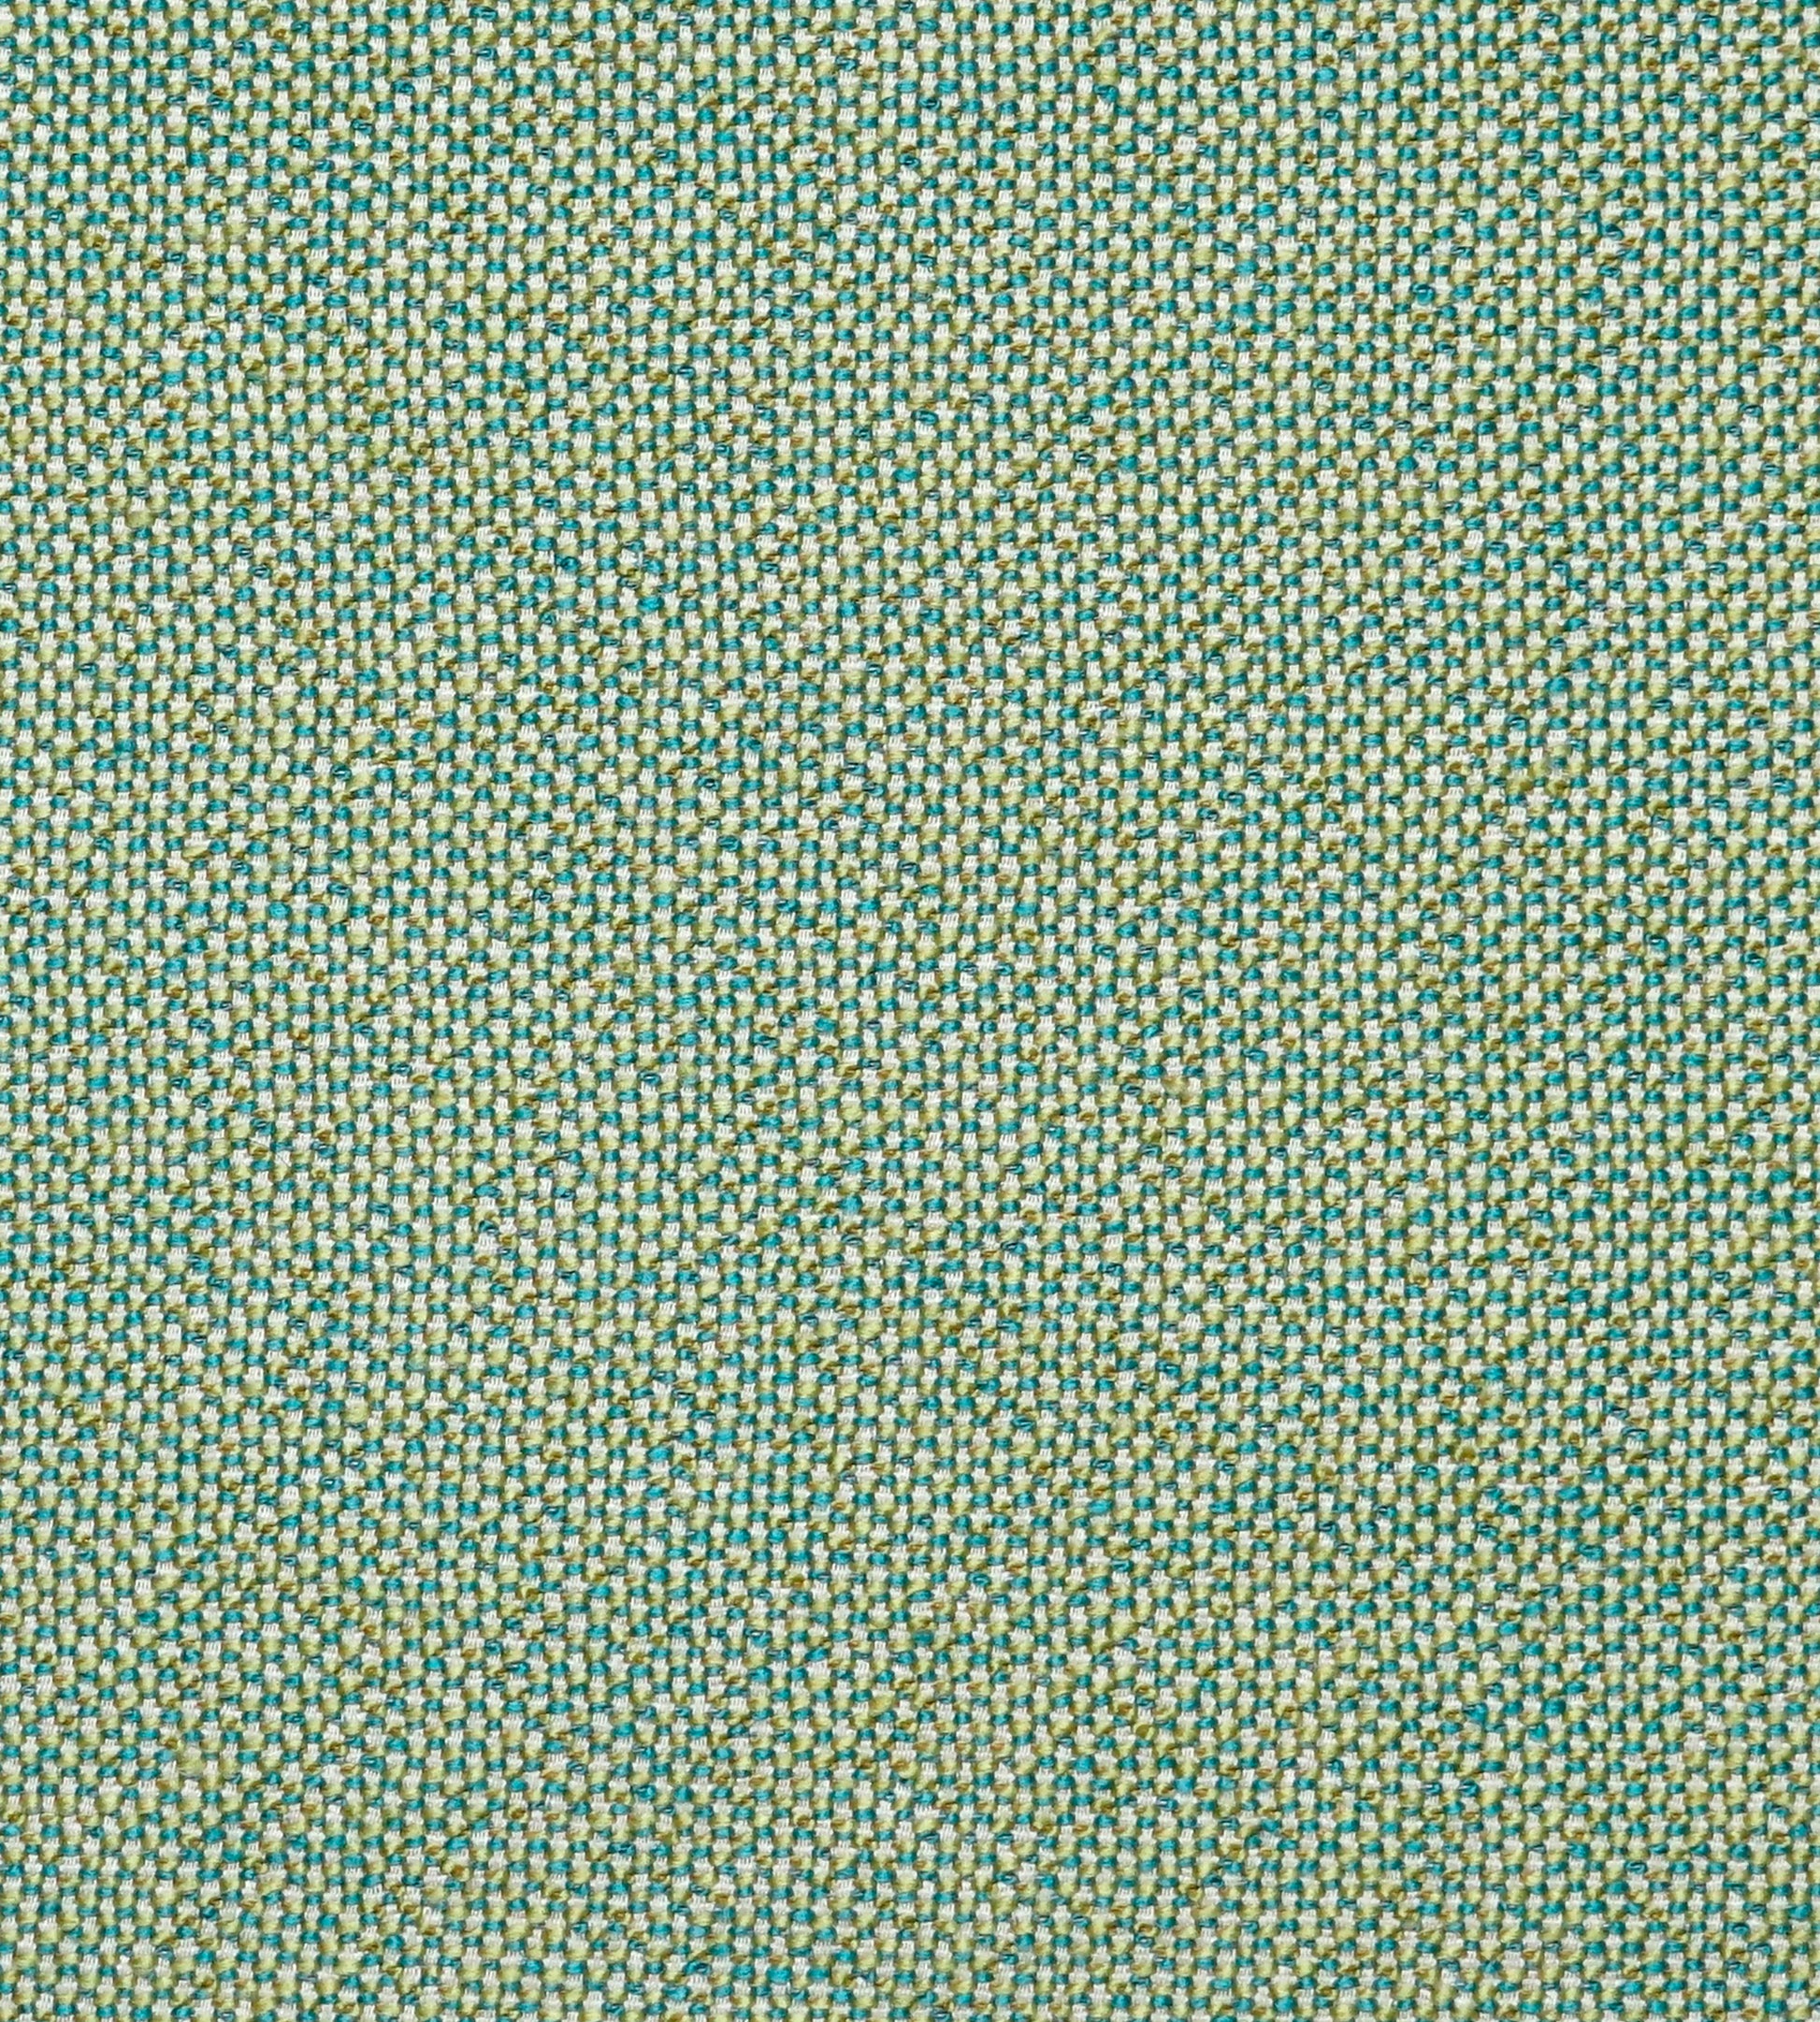 Purchase Scalamandre Fabric Pattern number SC 002027249, City Tweed Palm Leaf 1